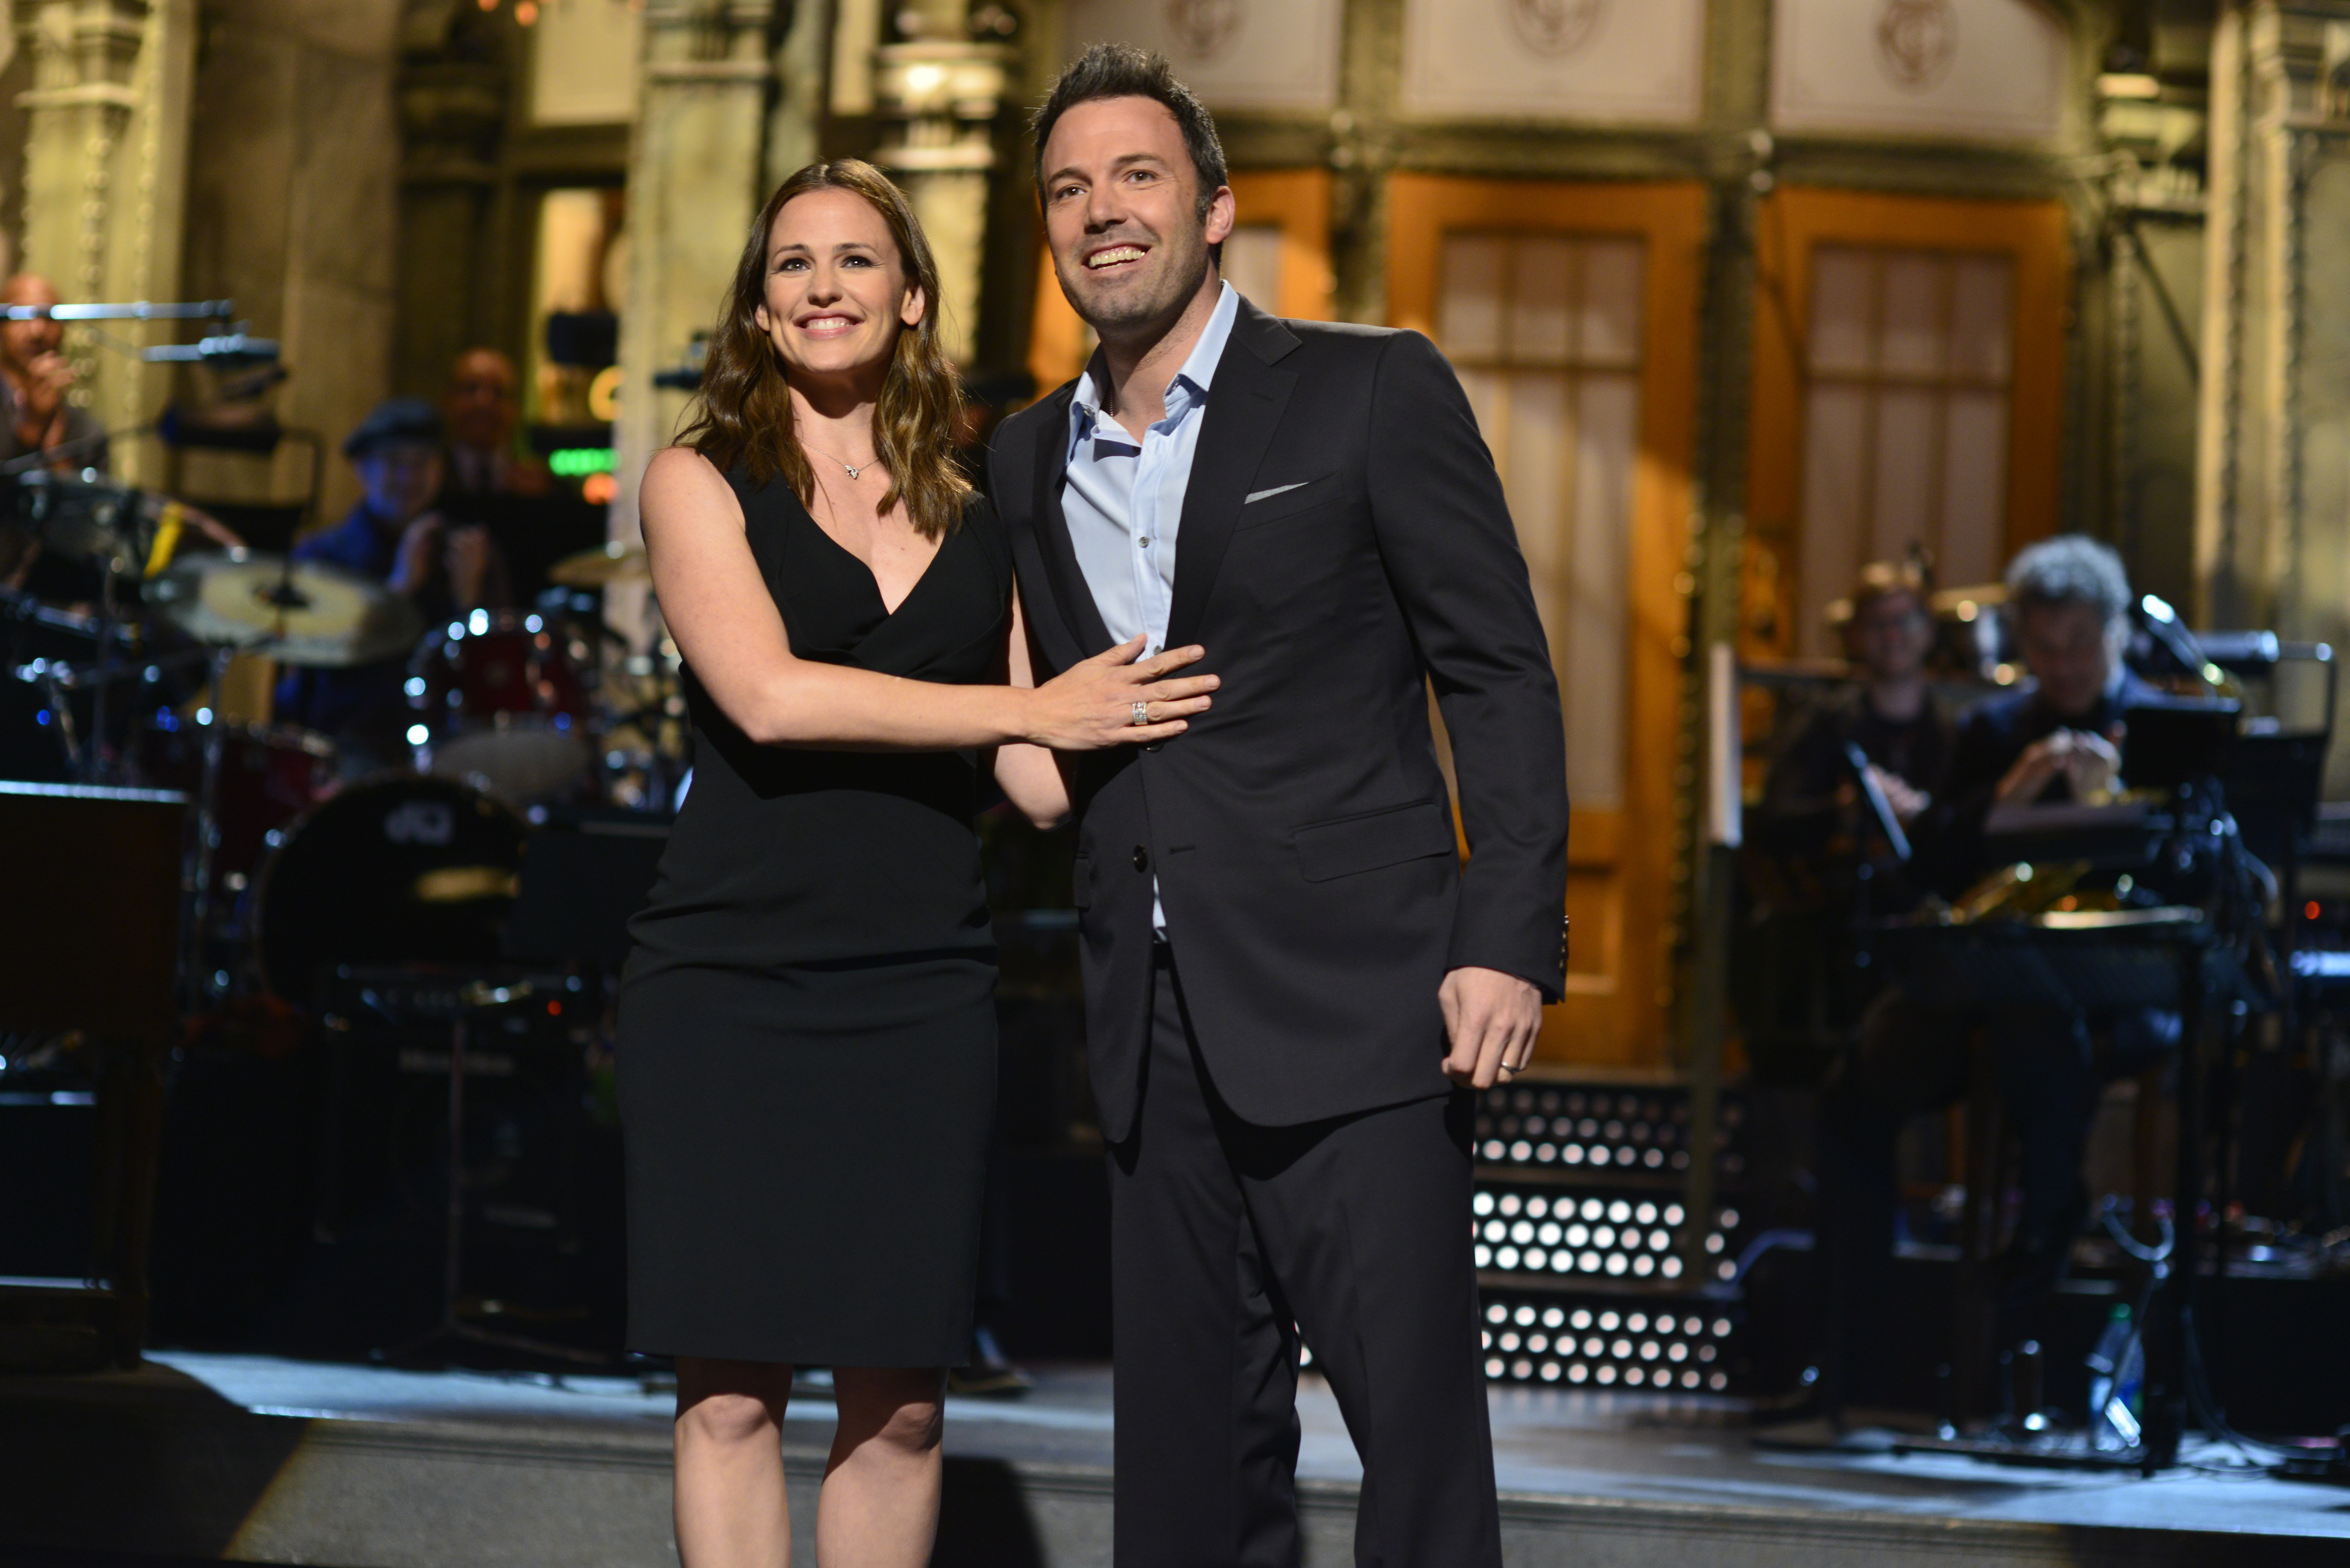 Jennifer Garner and Ben Affleck during the monologue on "Saturday Night Live" on May 18, 2013 | Source: Getty Images